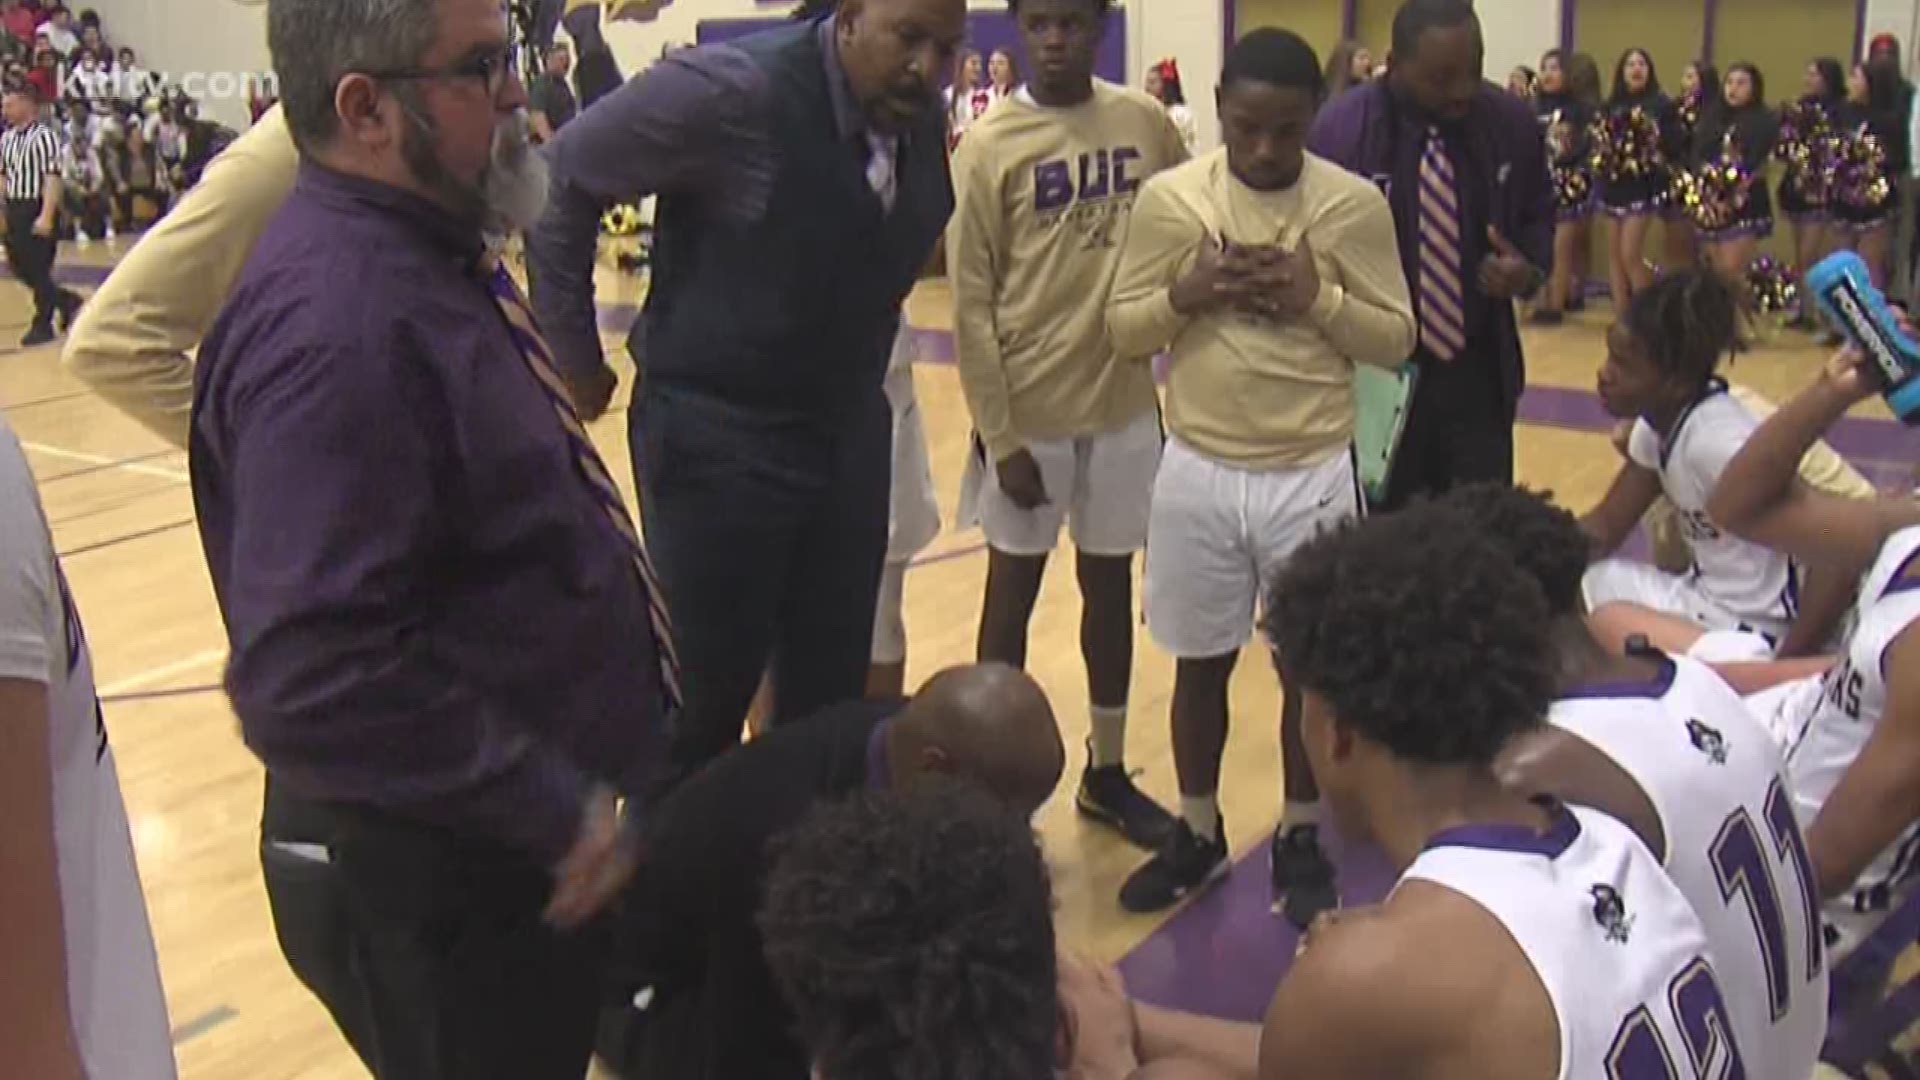 Miller boys basketball picks up come from behind win to essentially tie Ray at the top of District 30-5A. Plus, highlights of two other games in the Coastal Bend.